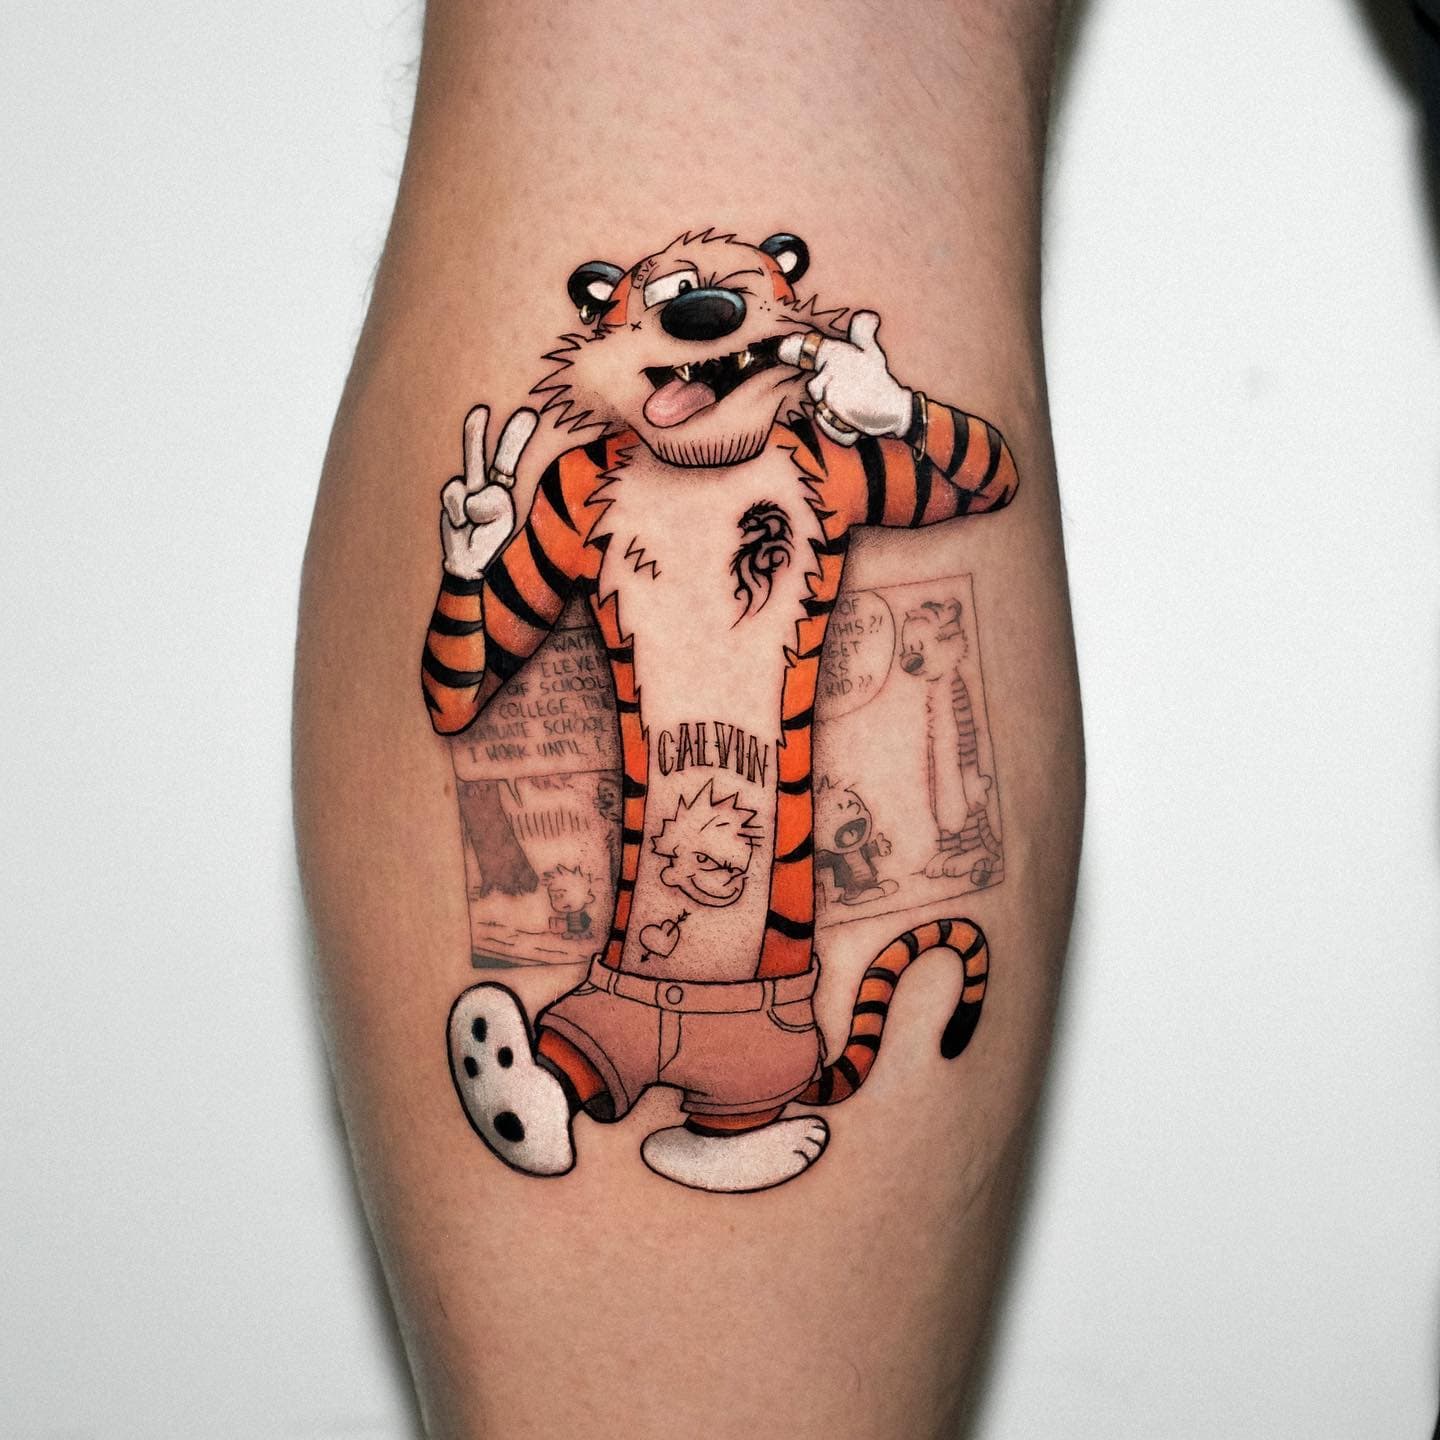 70 Calvin And Hobbes Tattoo Designs For Men  Comic Ideas  Calvin and hobbes  tattoo Tattoo designs men Tattoos for guys